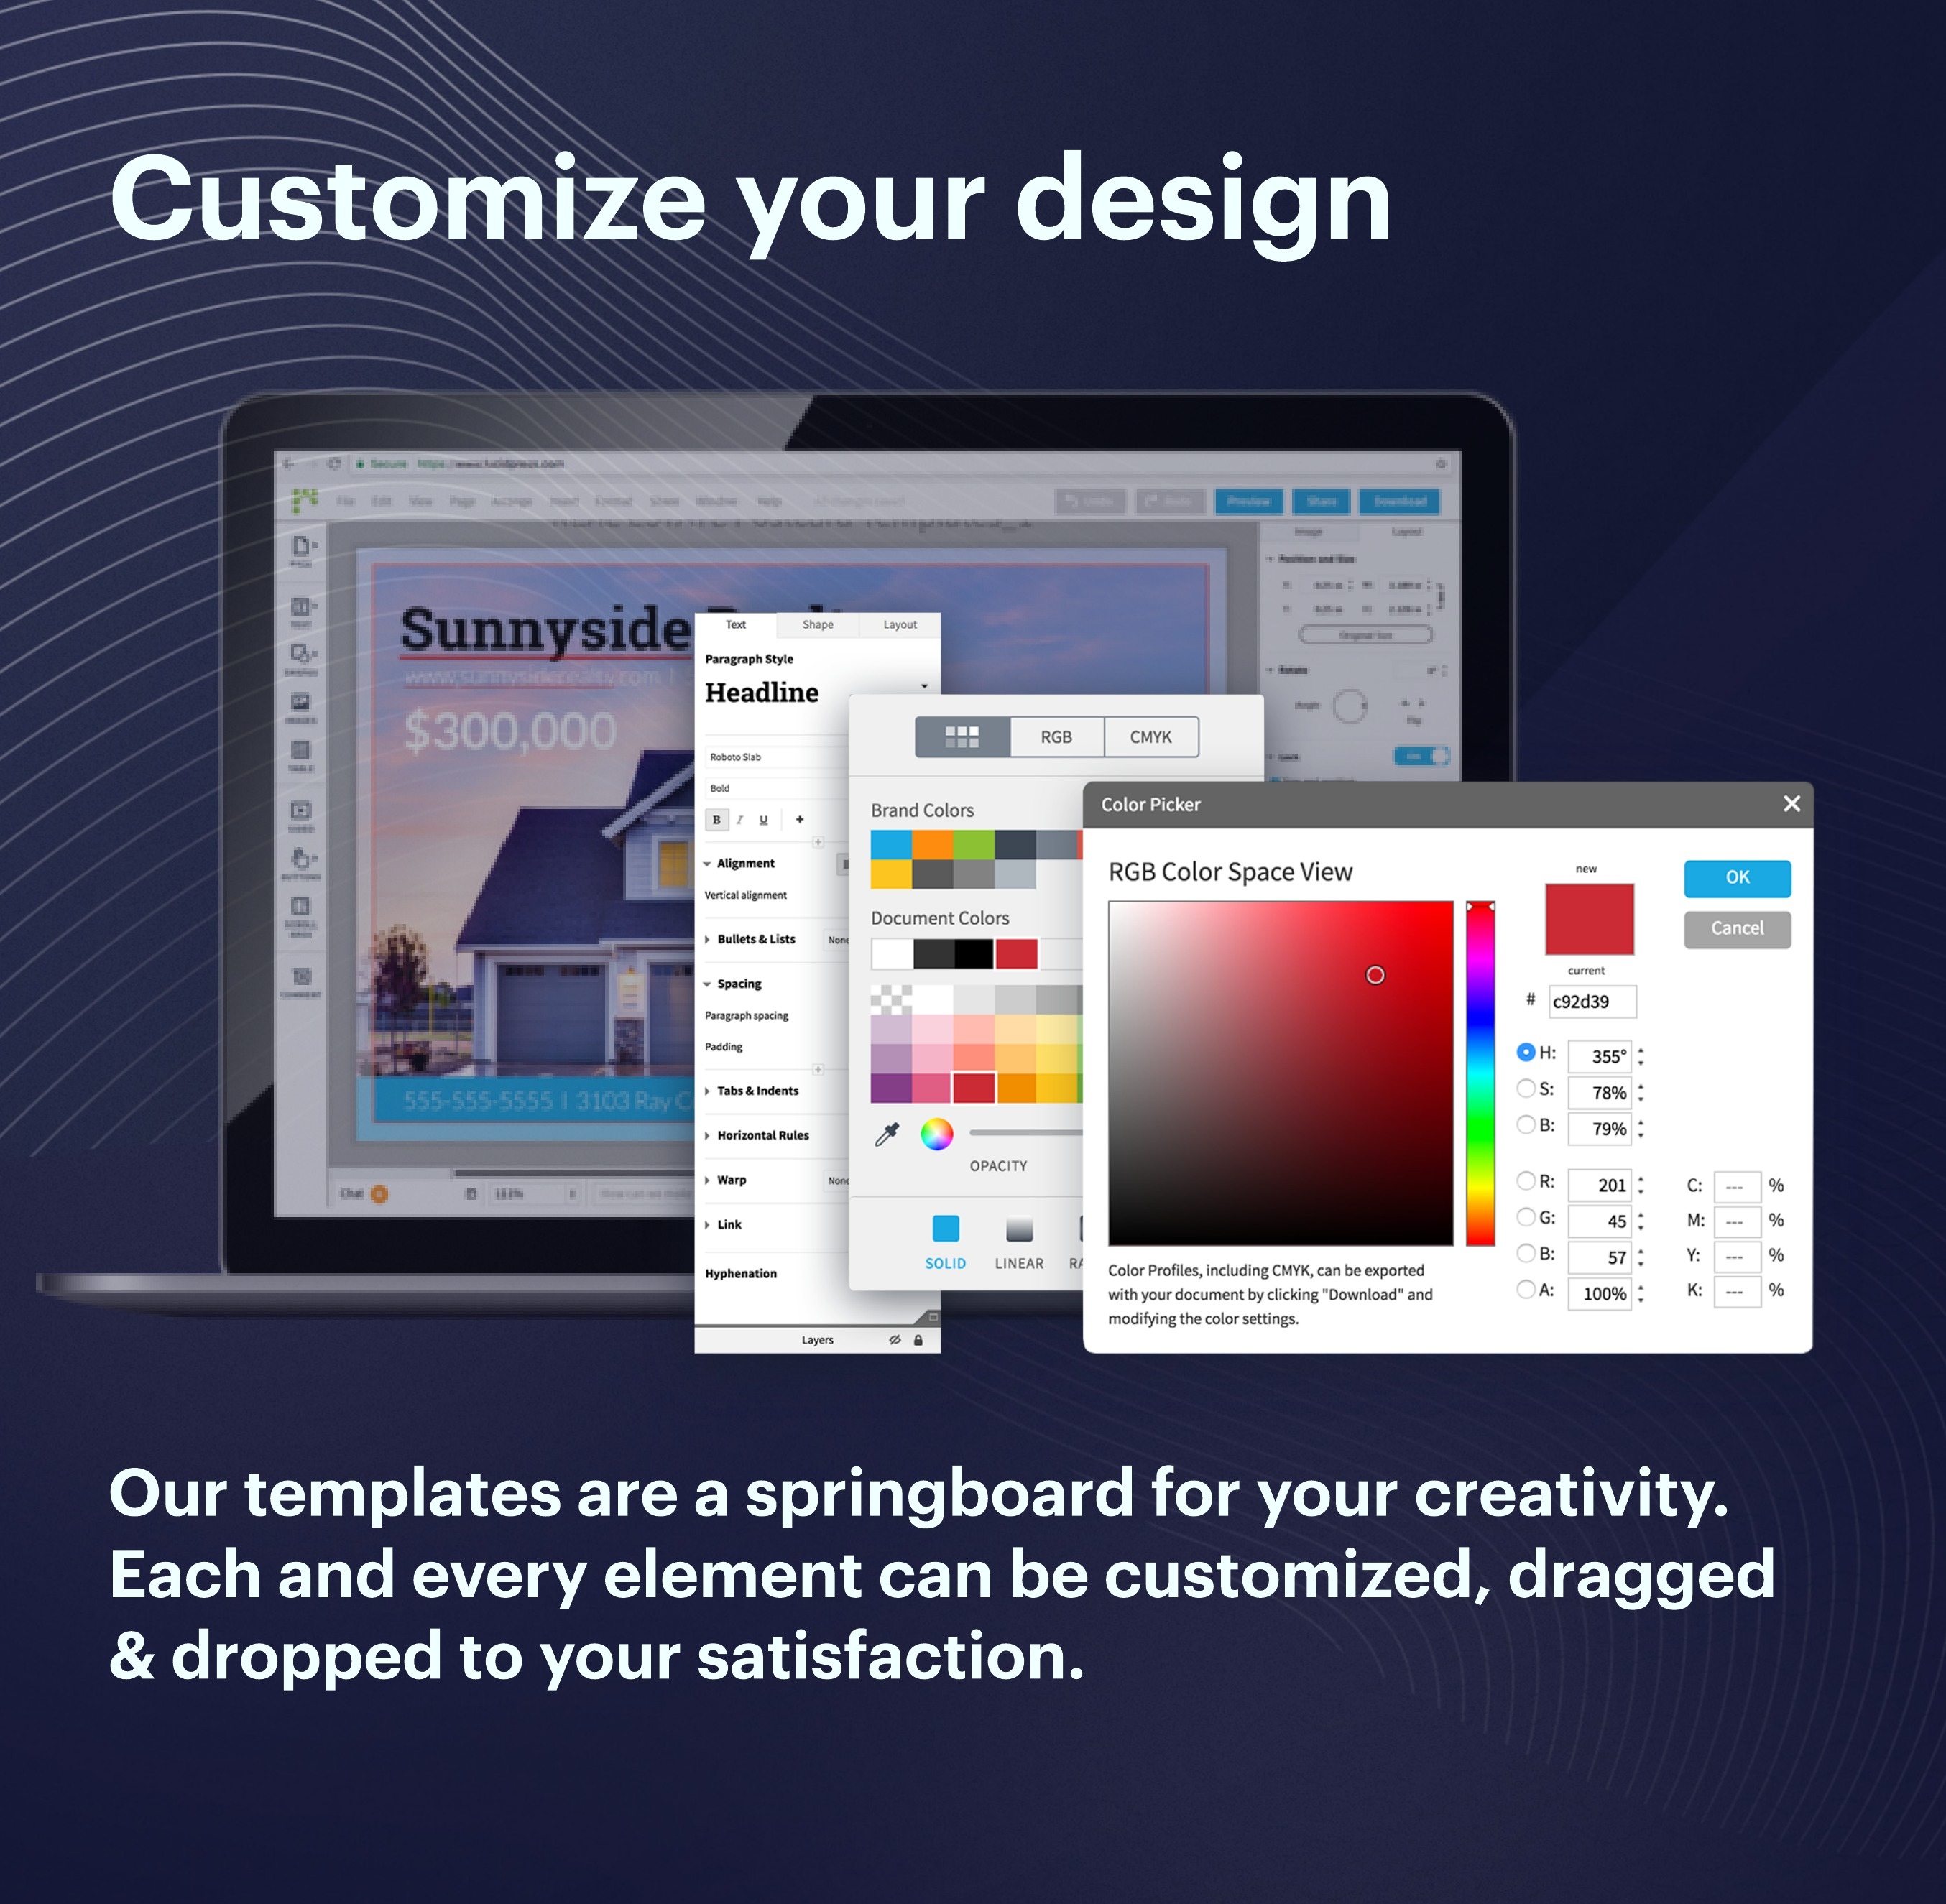 Marq Software - Our templates are a springboard for your creativity. Each and every element can be customized, dragged and dropped to your satisfaction.